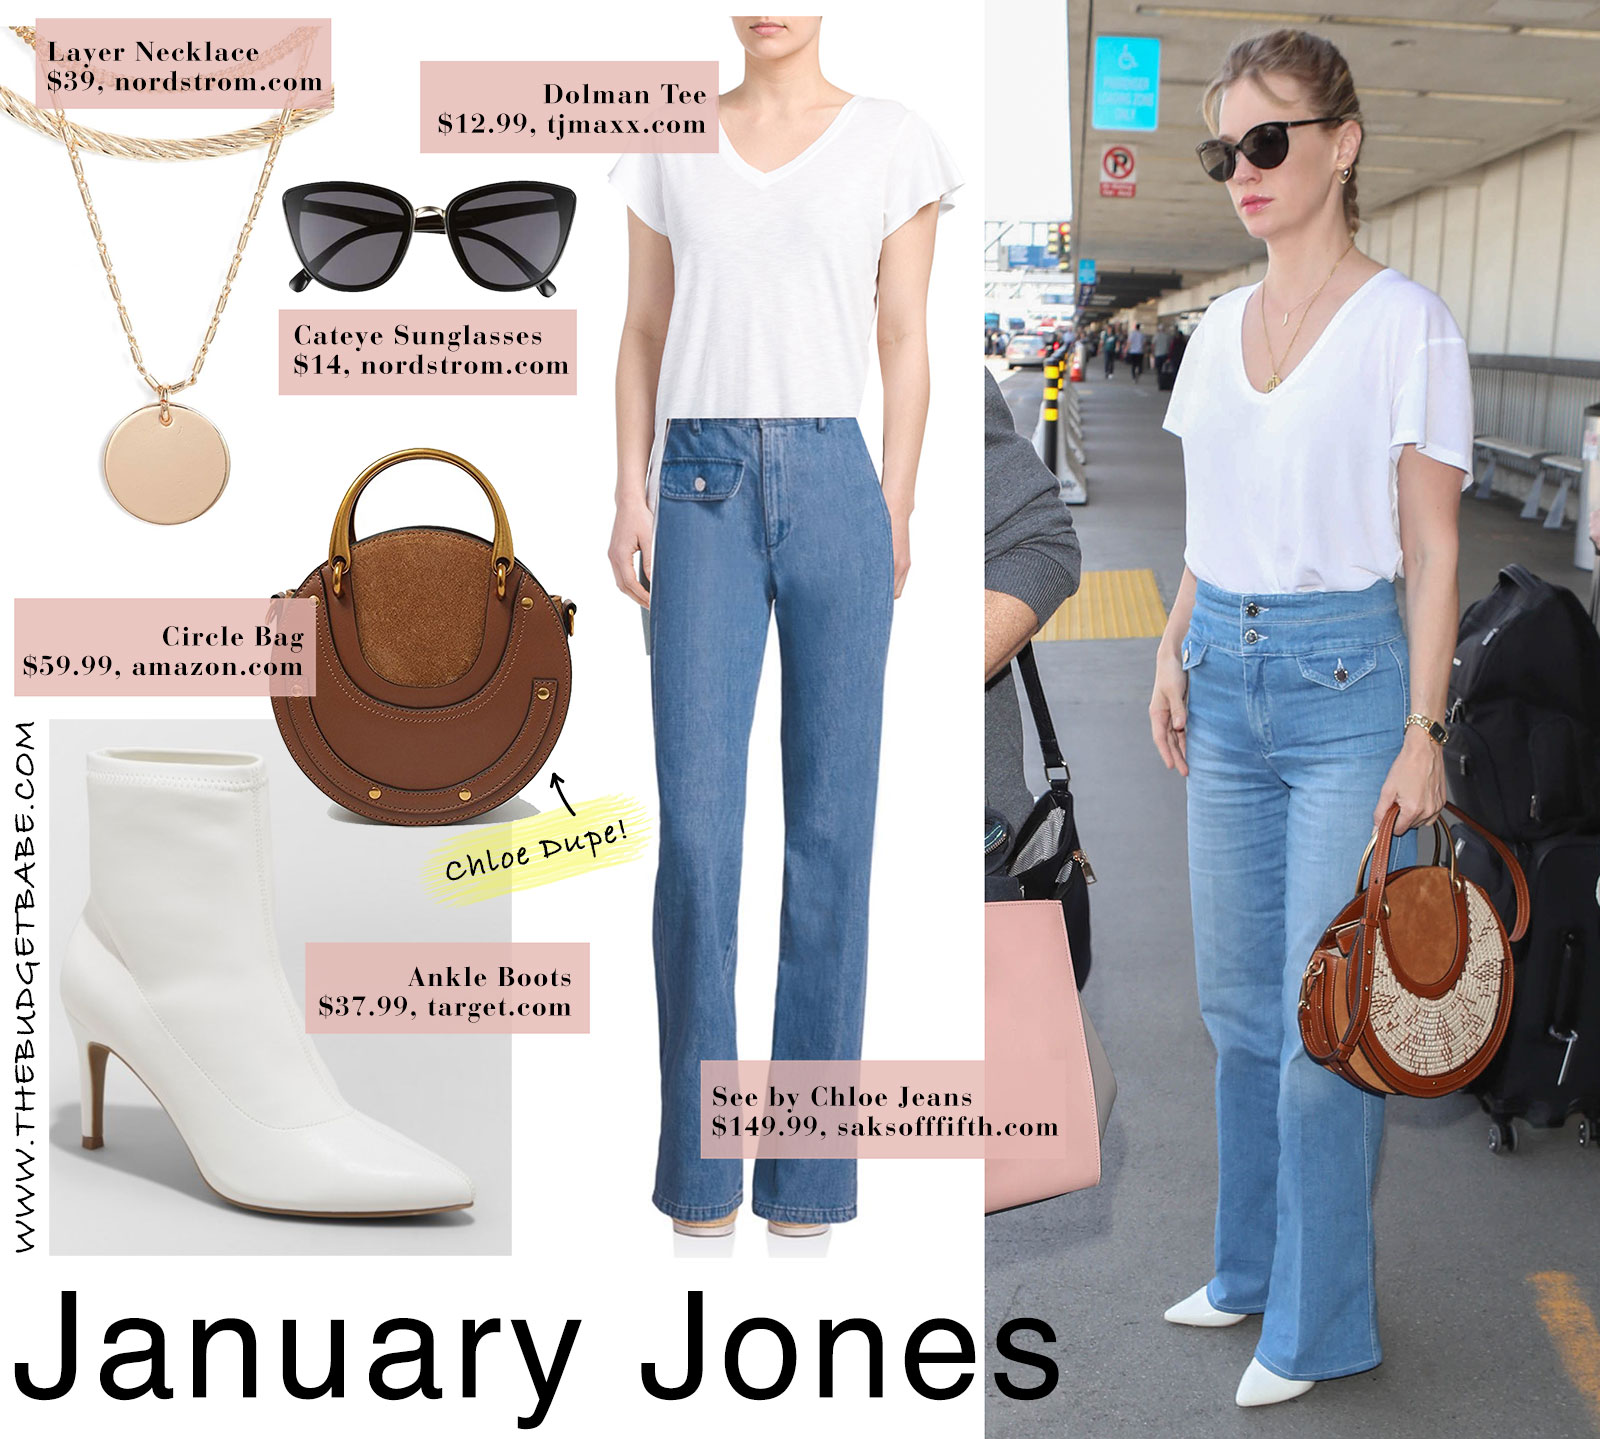 January Jones style featuring white tee, high waist button-fly jeans and white boots with Chloe bag